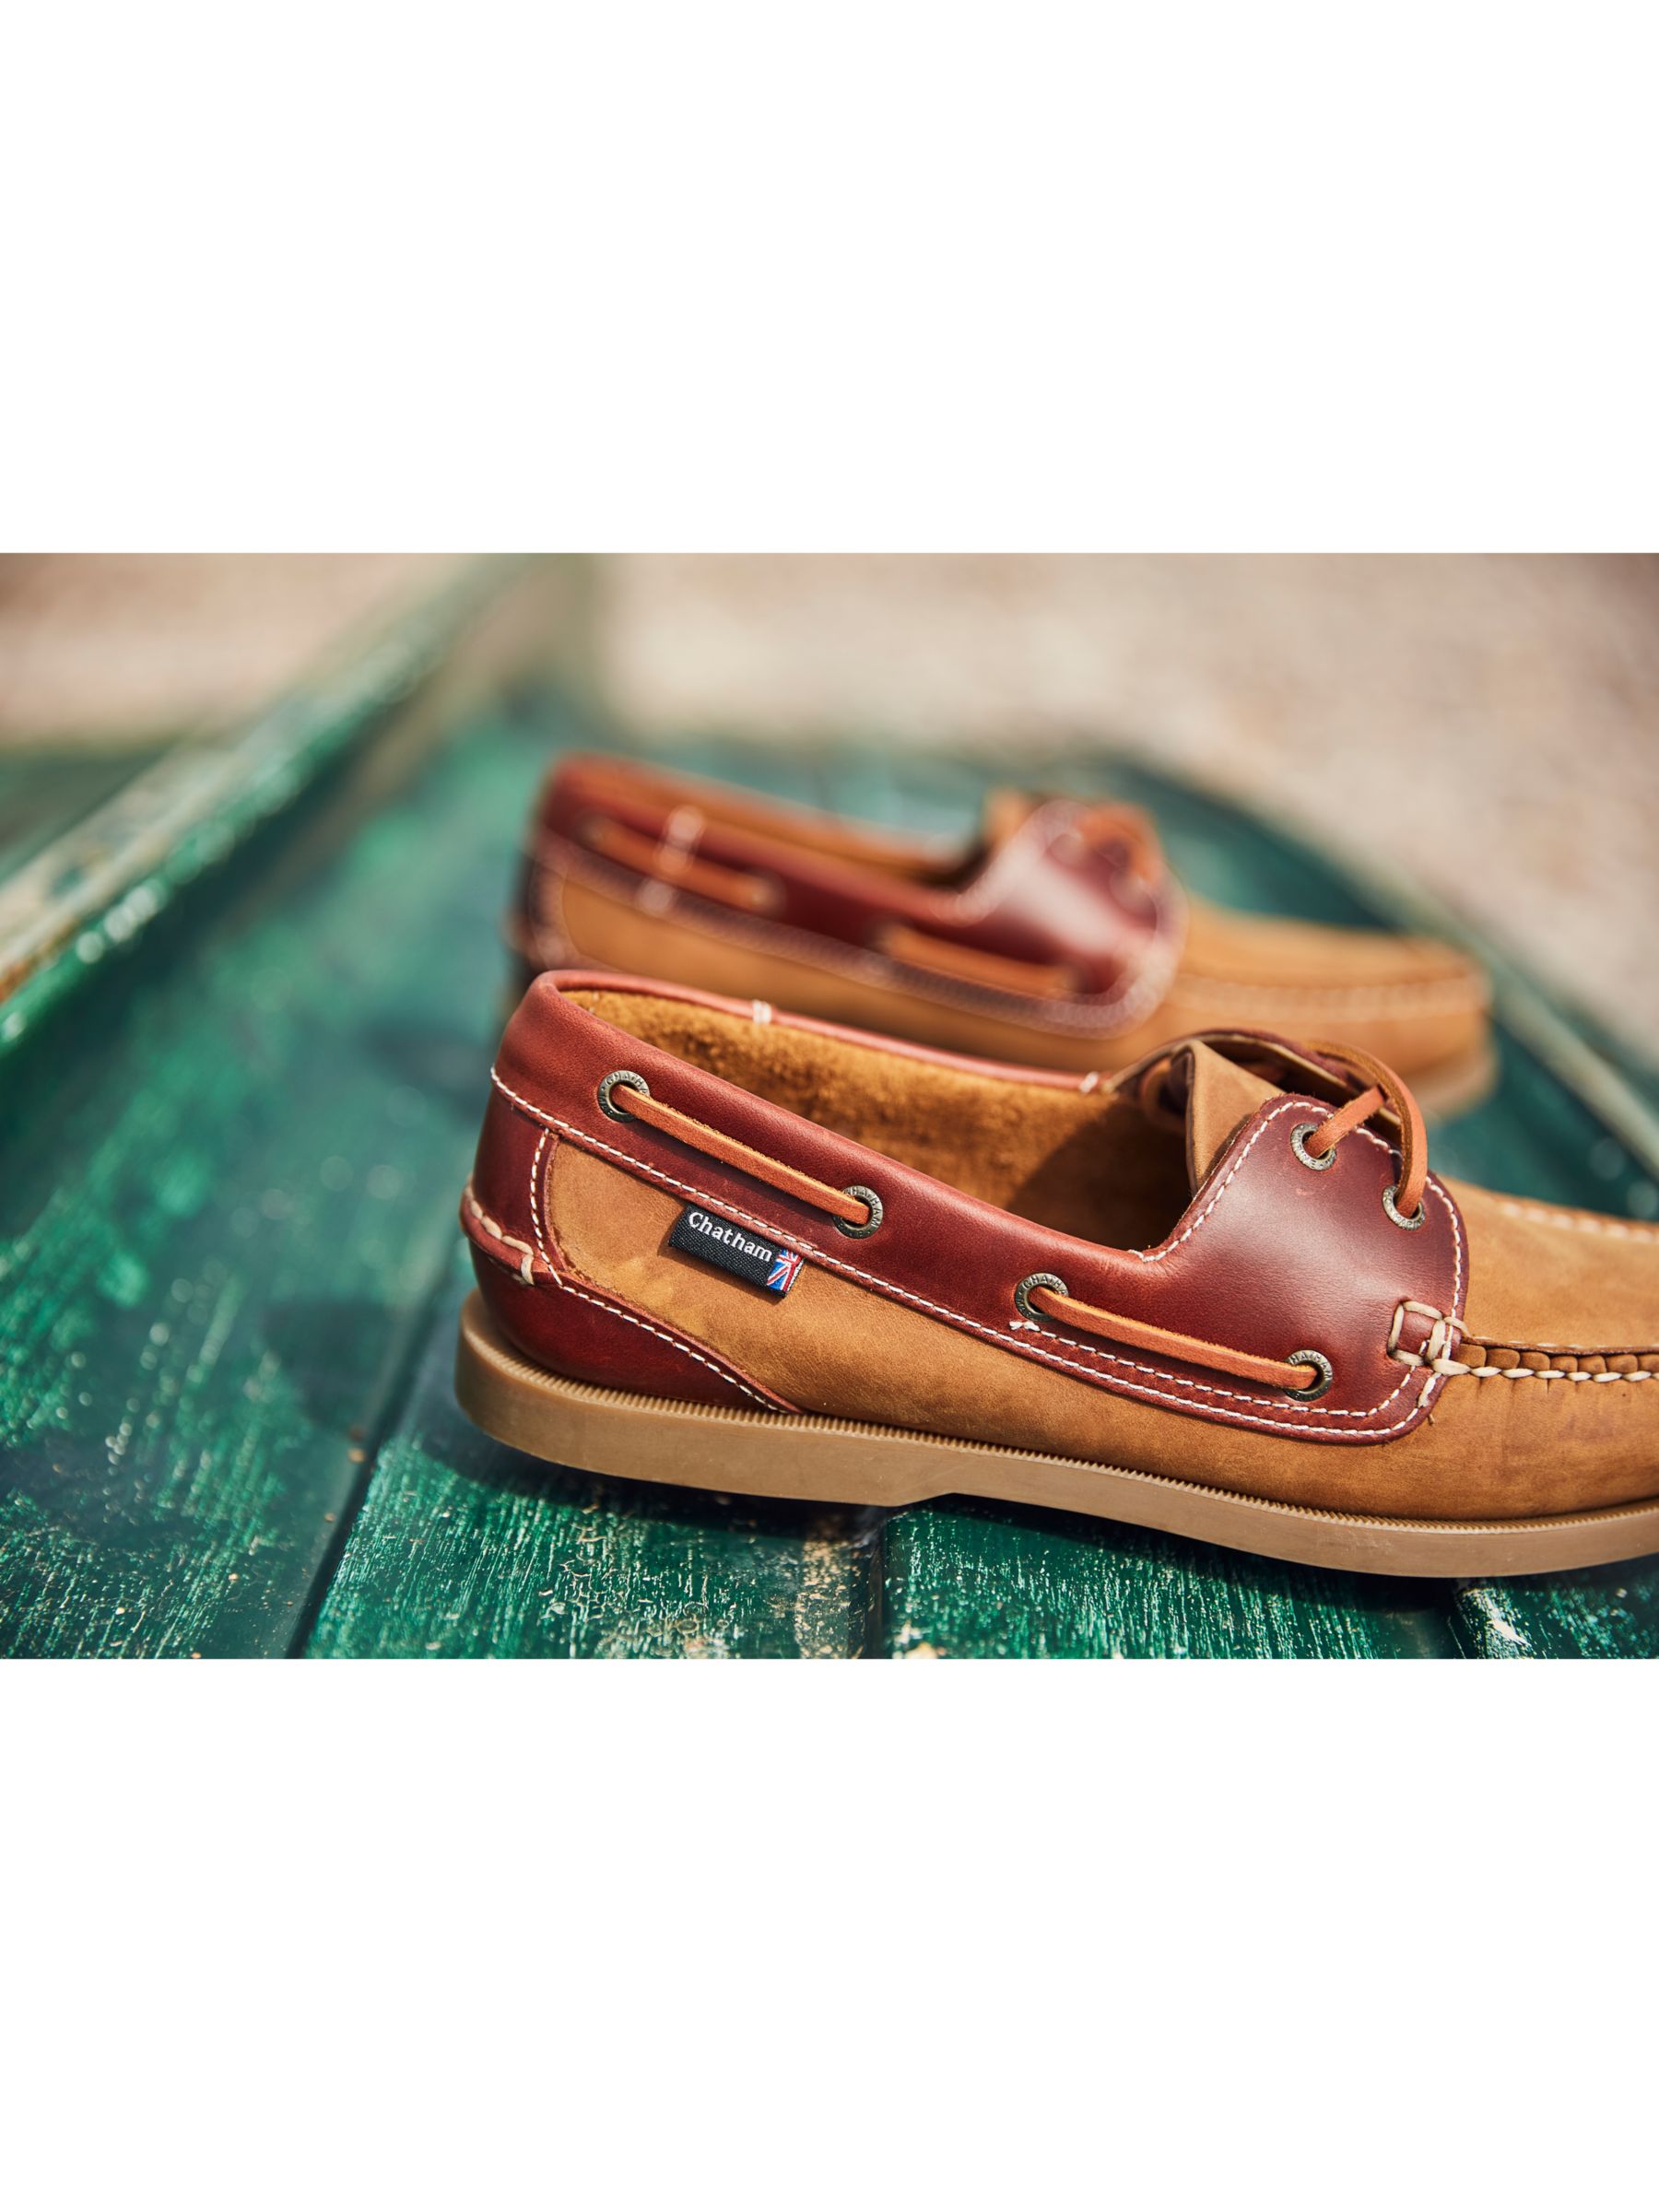 Bermuda G2, Mens Leather Deck Shoes